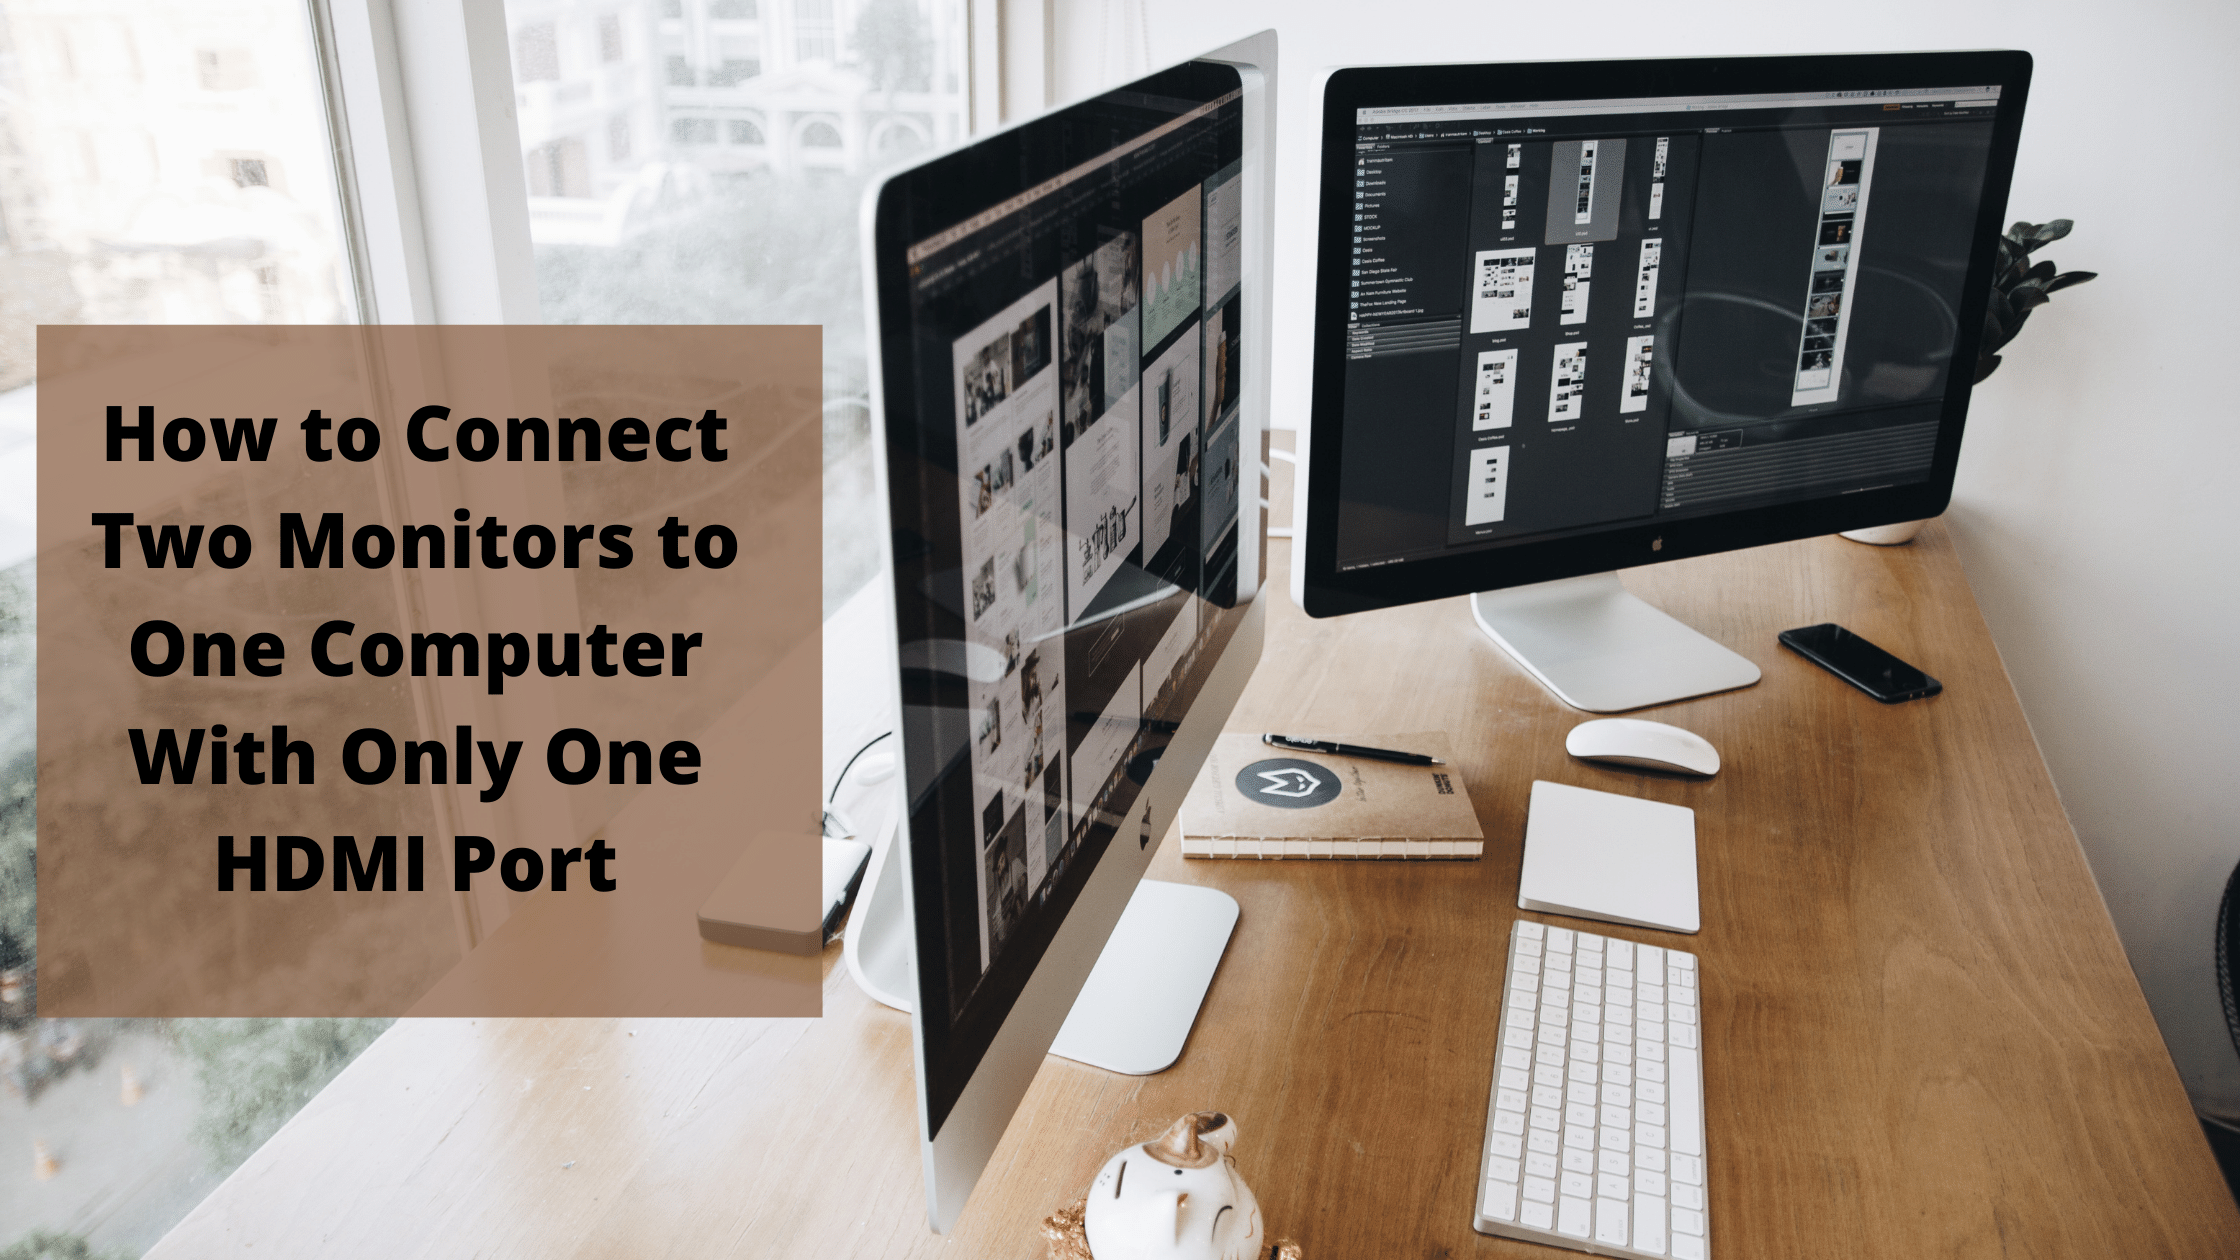 How to Connect Two Monitors to One Computer With One HDMI Port